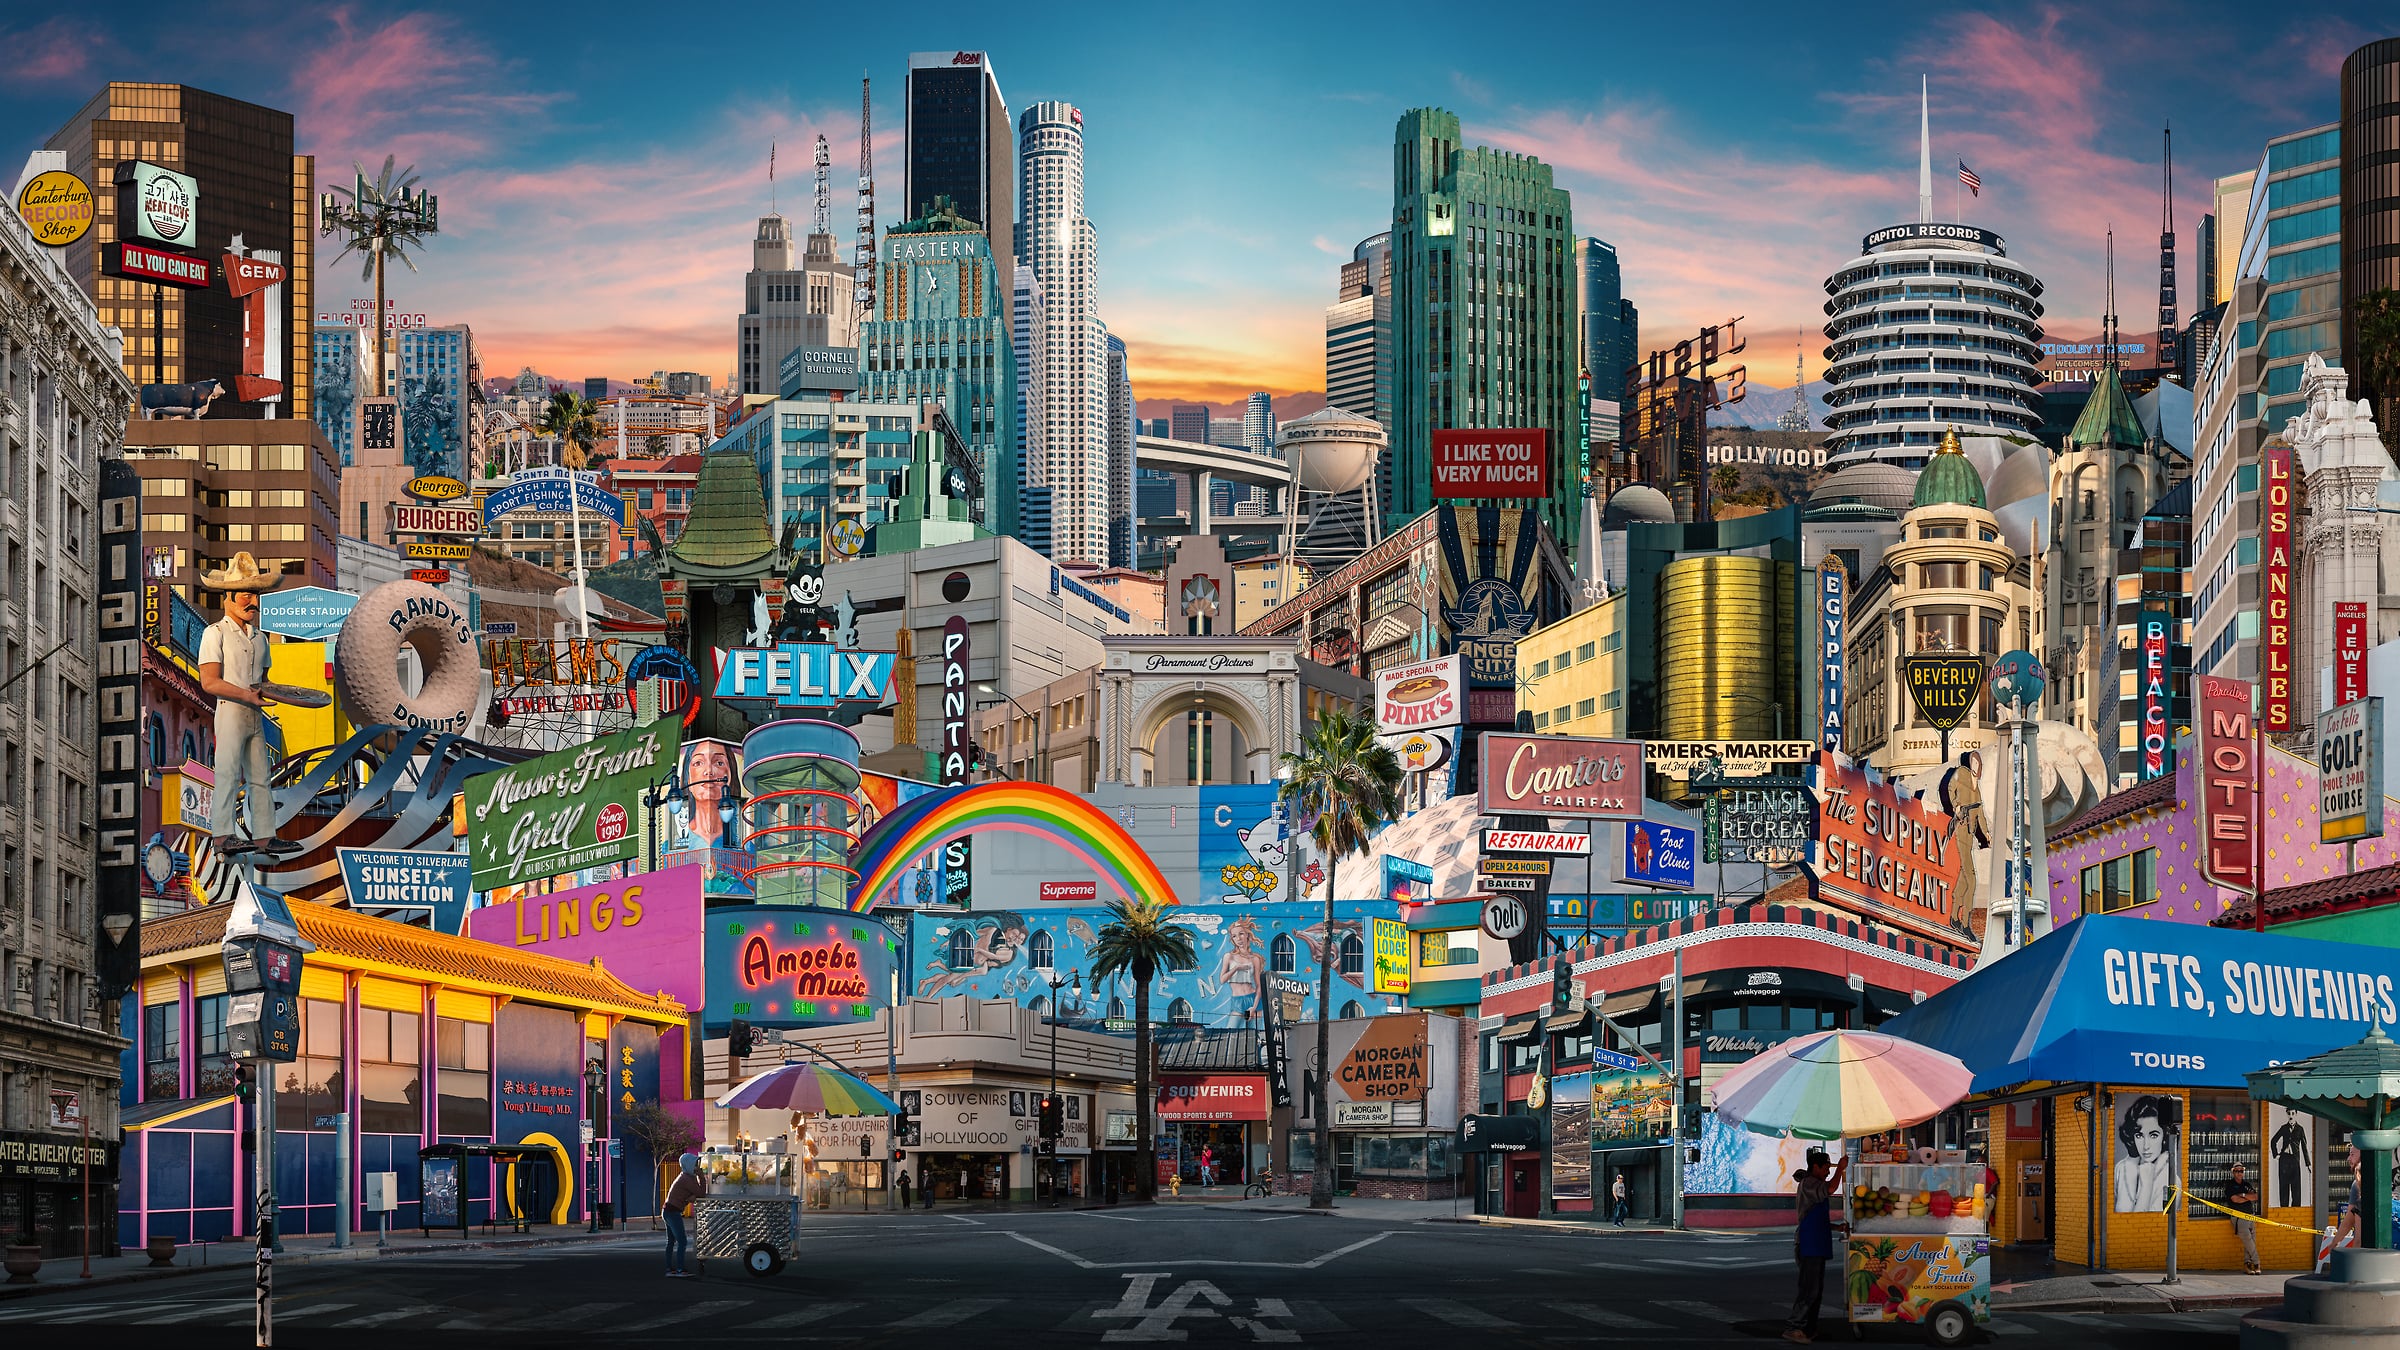 207 megapixels! A very high resolution, big wall art print of scenes from Los Angeles; artistic collage photograph created by Andrew Soria.